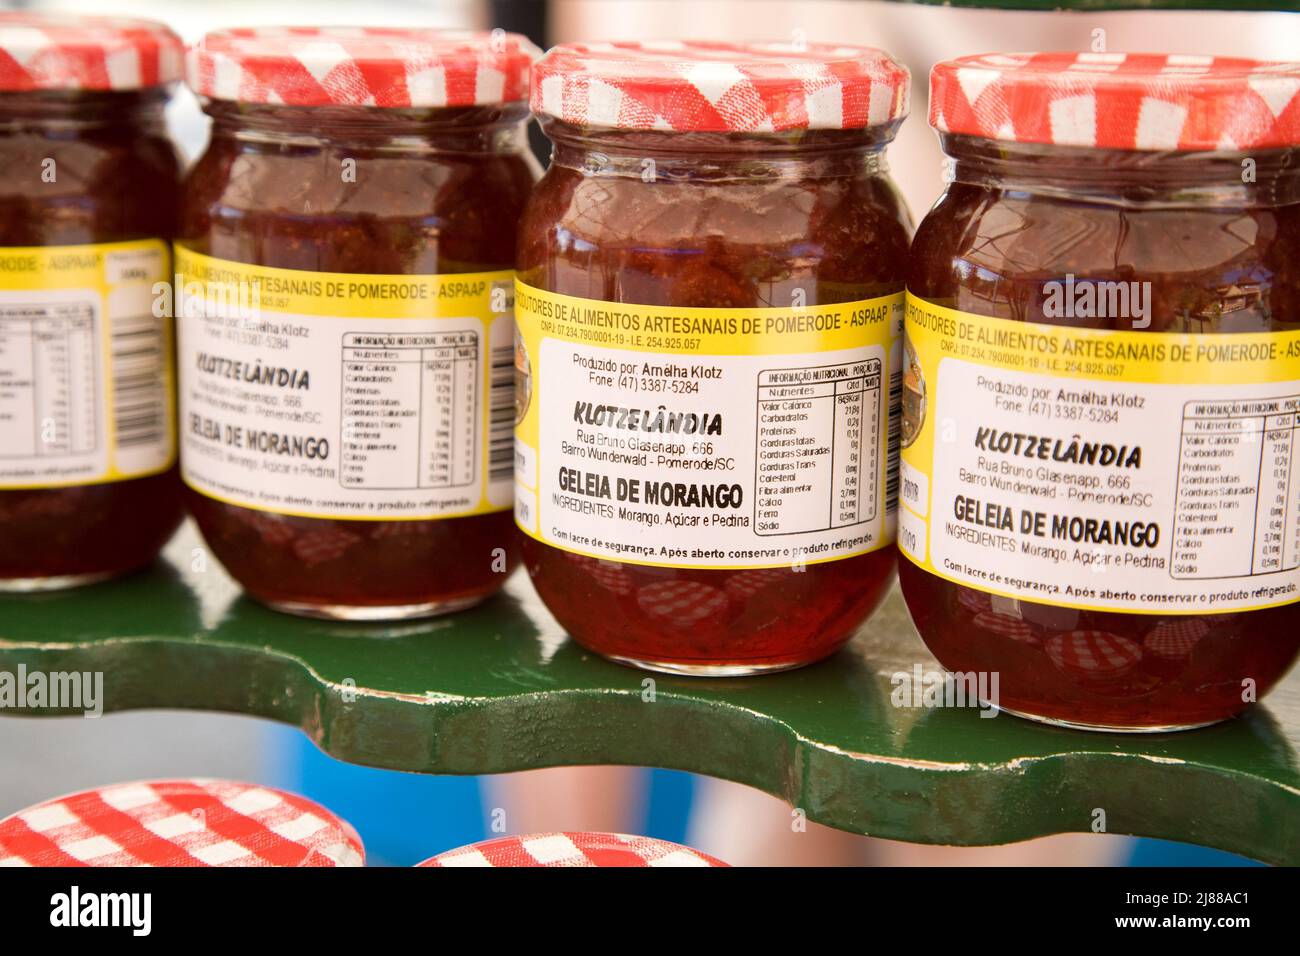 Artesanal strawberry jam on sale outside the Welcome Center in the German community of Pomerode in Santa Catarina, Brazil Stock Photo